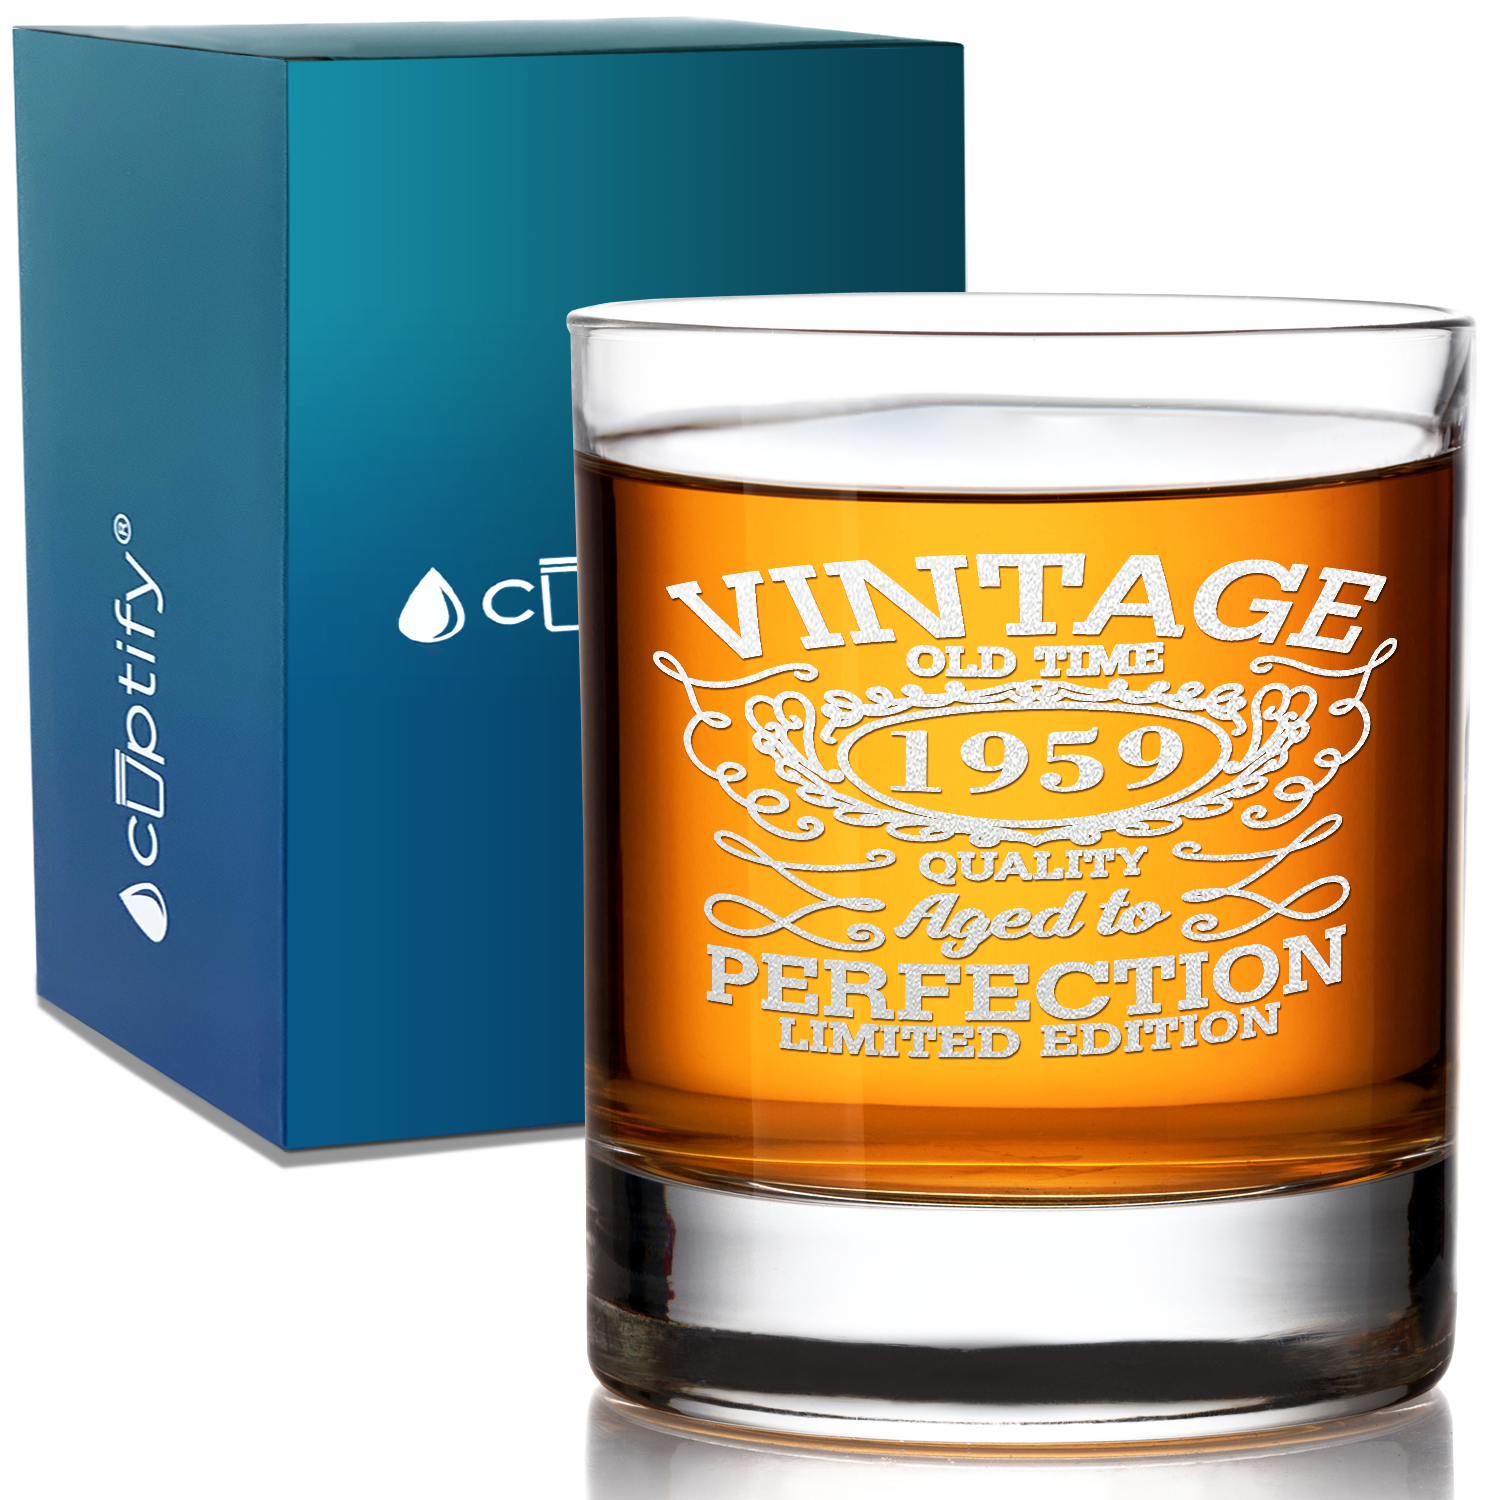 62nd Birthday Vintage 62 Years Old Time 1959 Quality Laser Engraved 10.25oz Old Fashion Glass